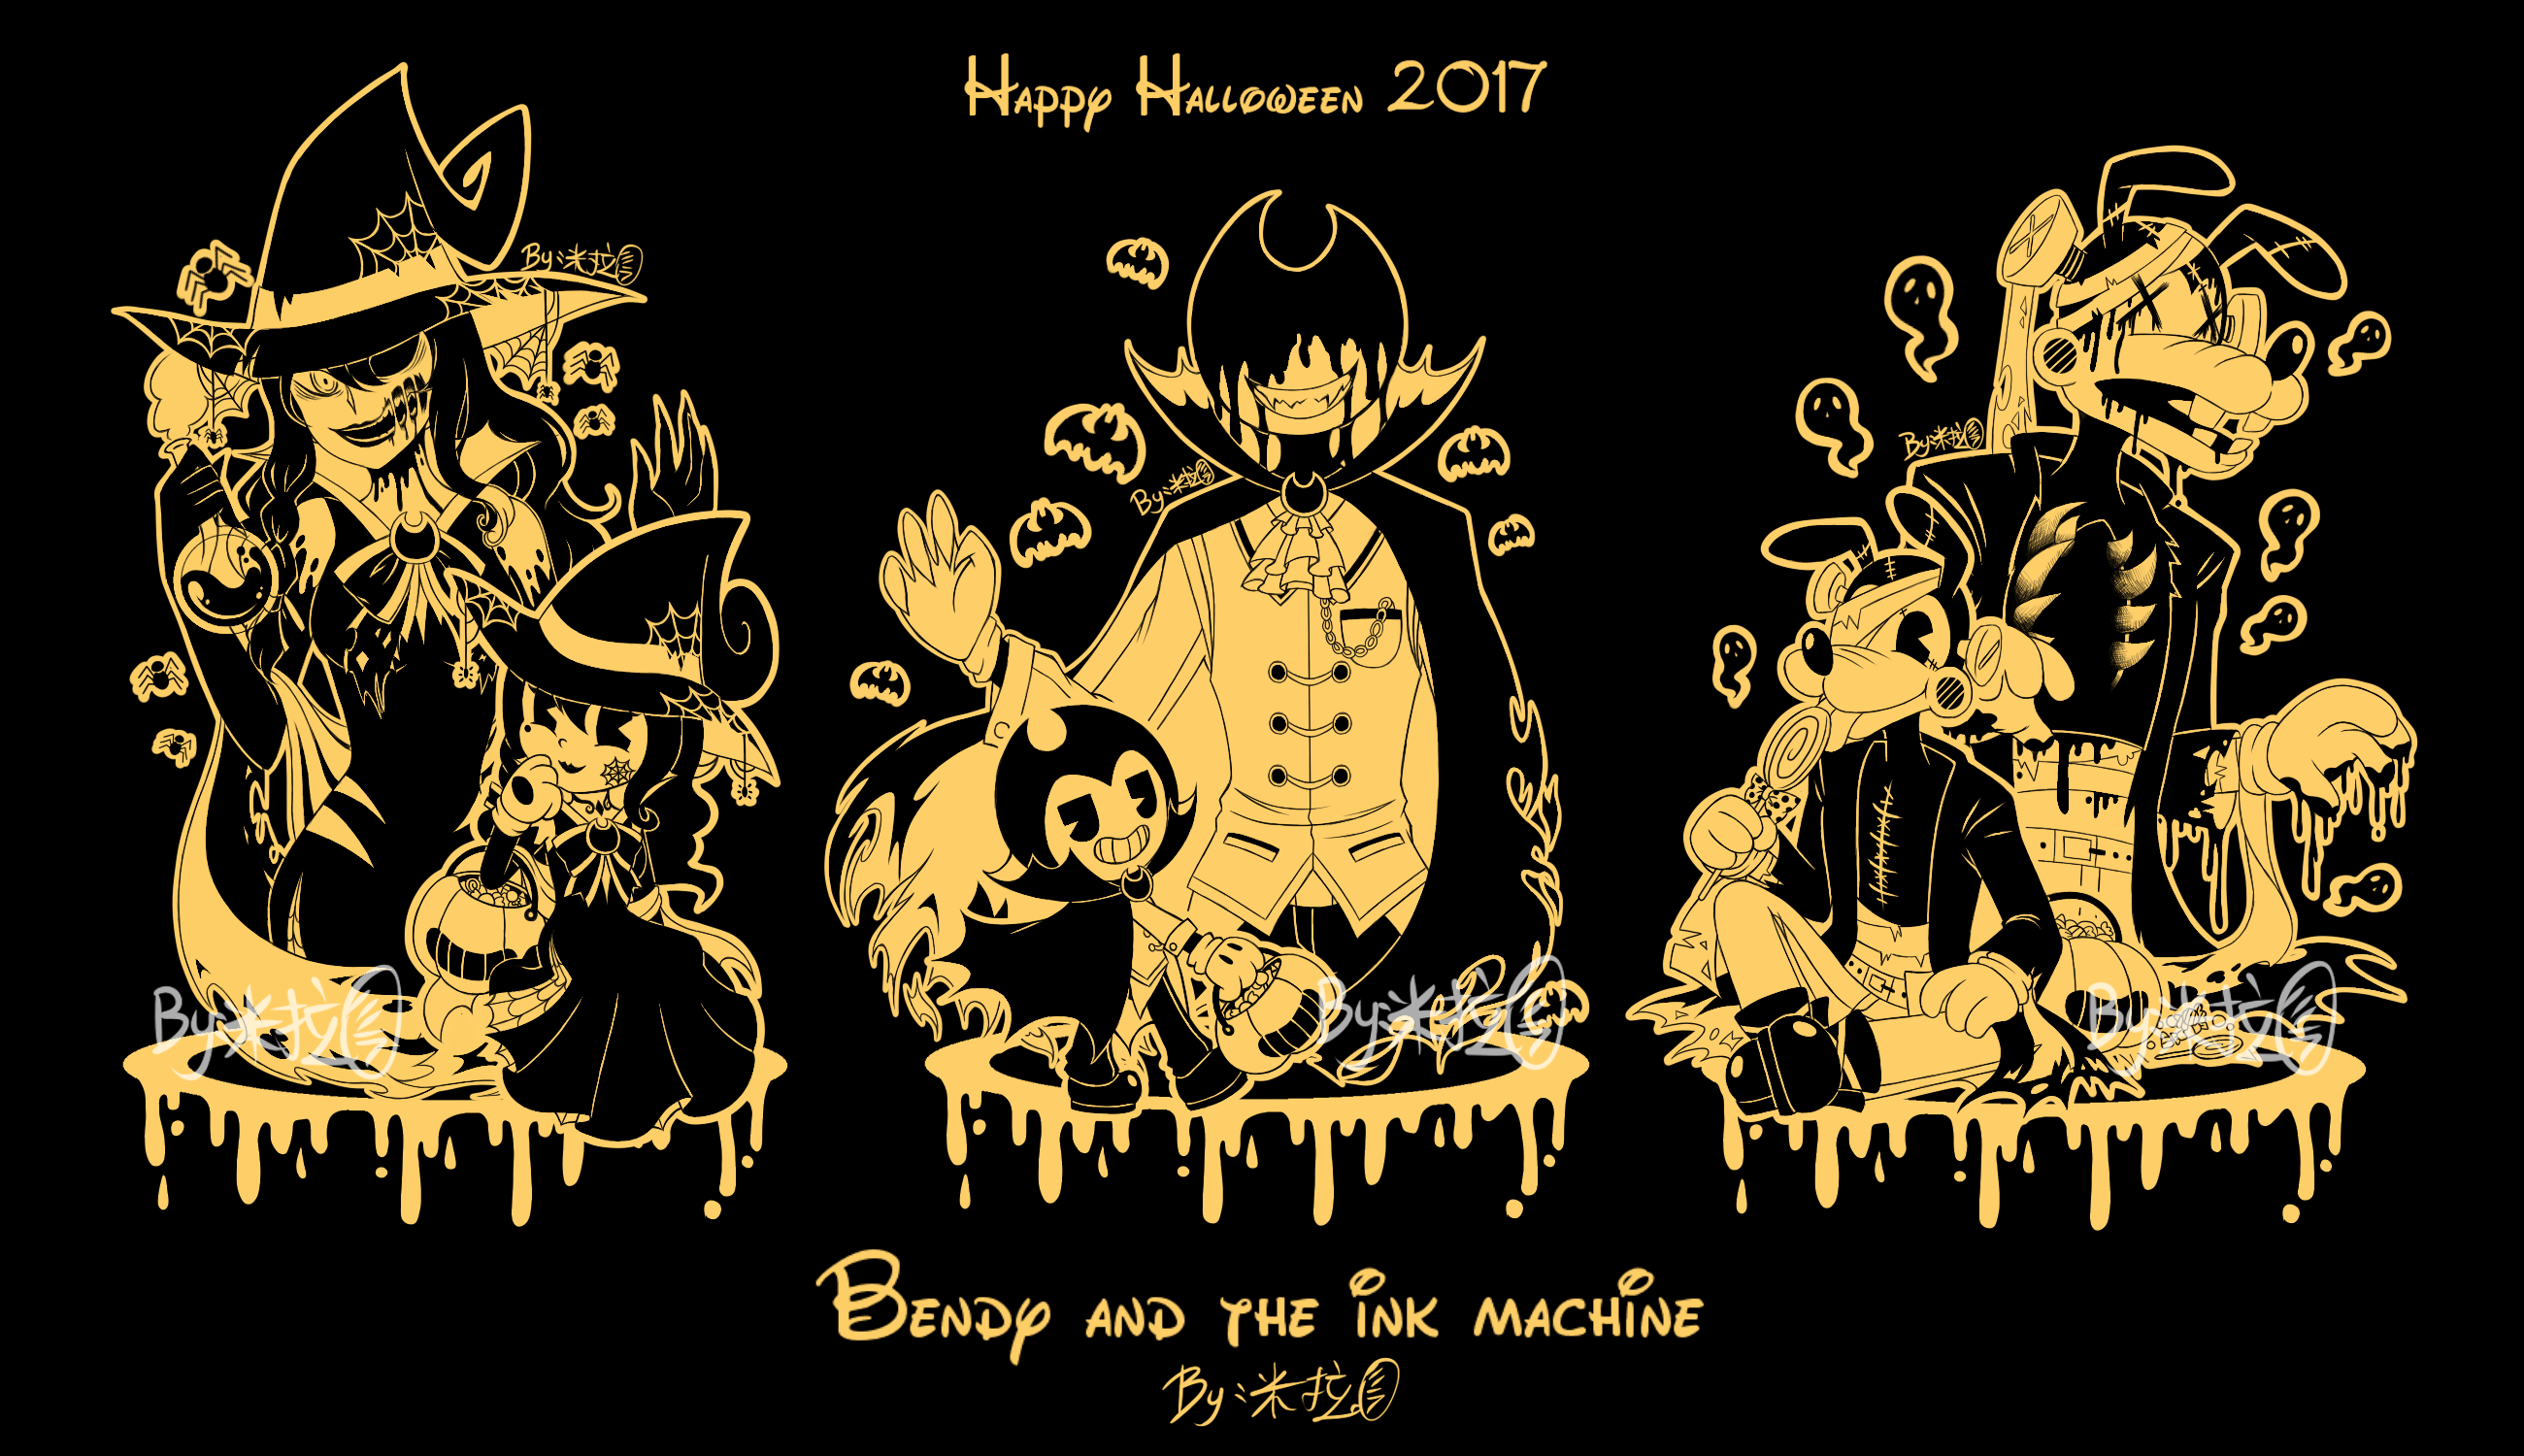 Pin by I Love Bendy on ✒Batim✒ | Bendy and the ink machine, Cute art,  Character design animation